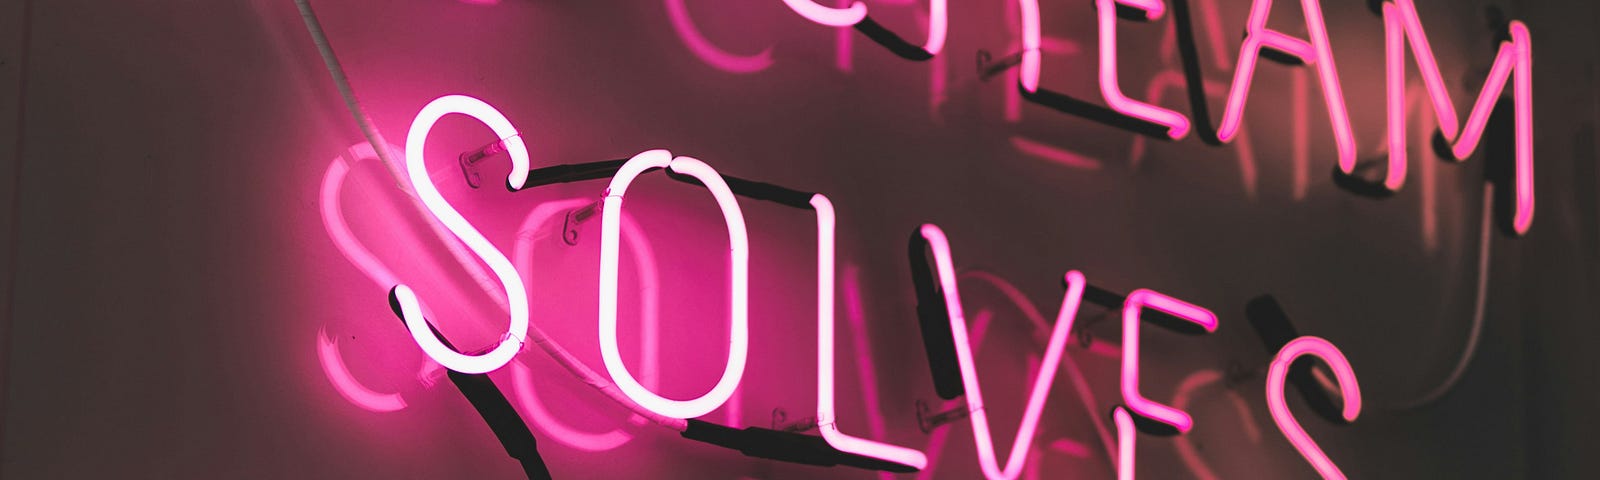 Pink neon sign saying ‘Ice-cream solves everything’